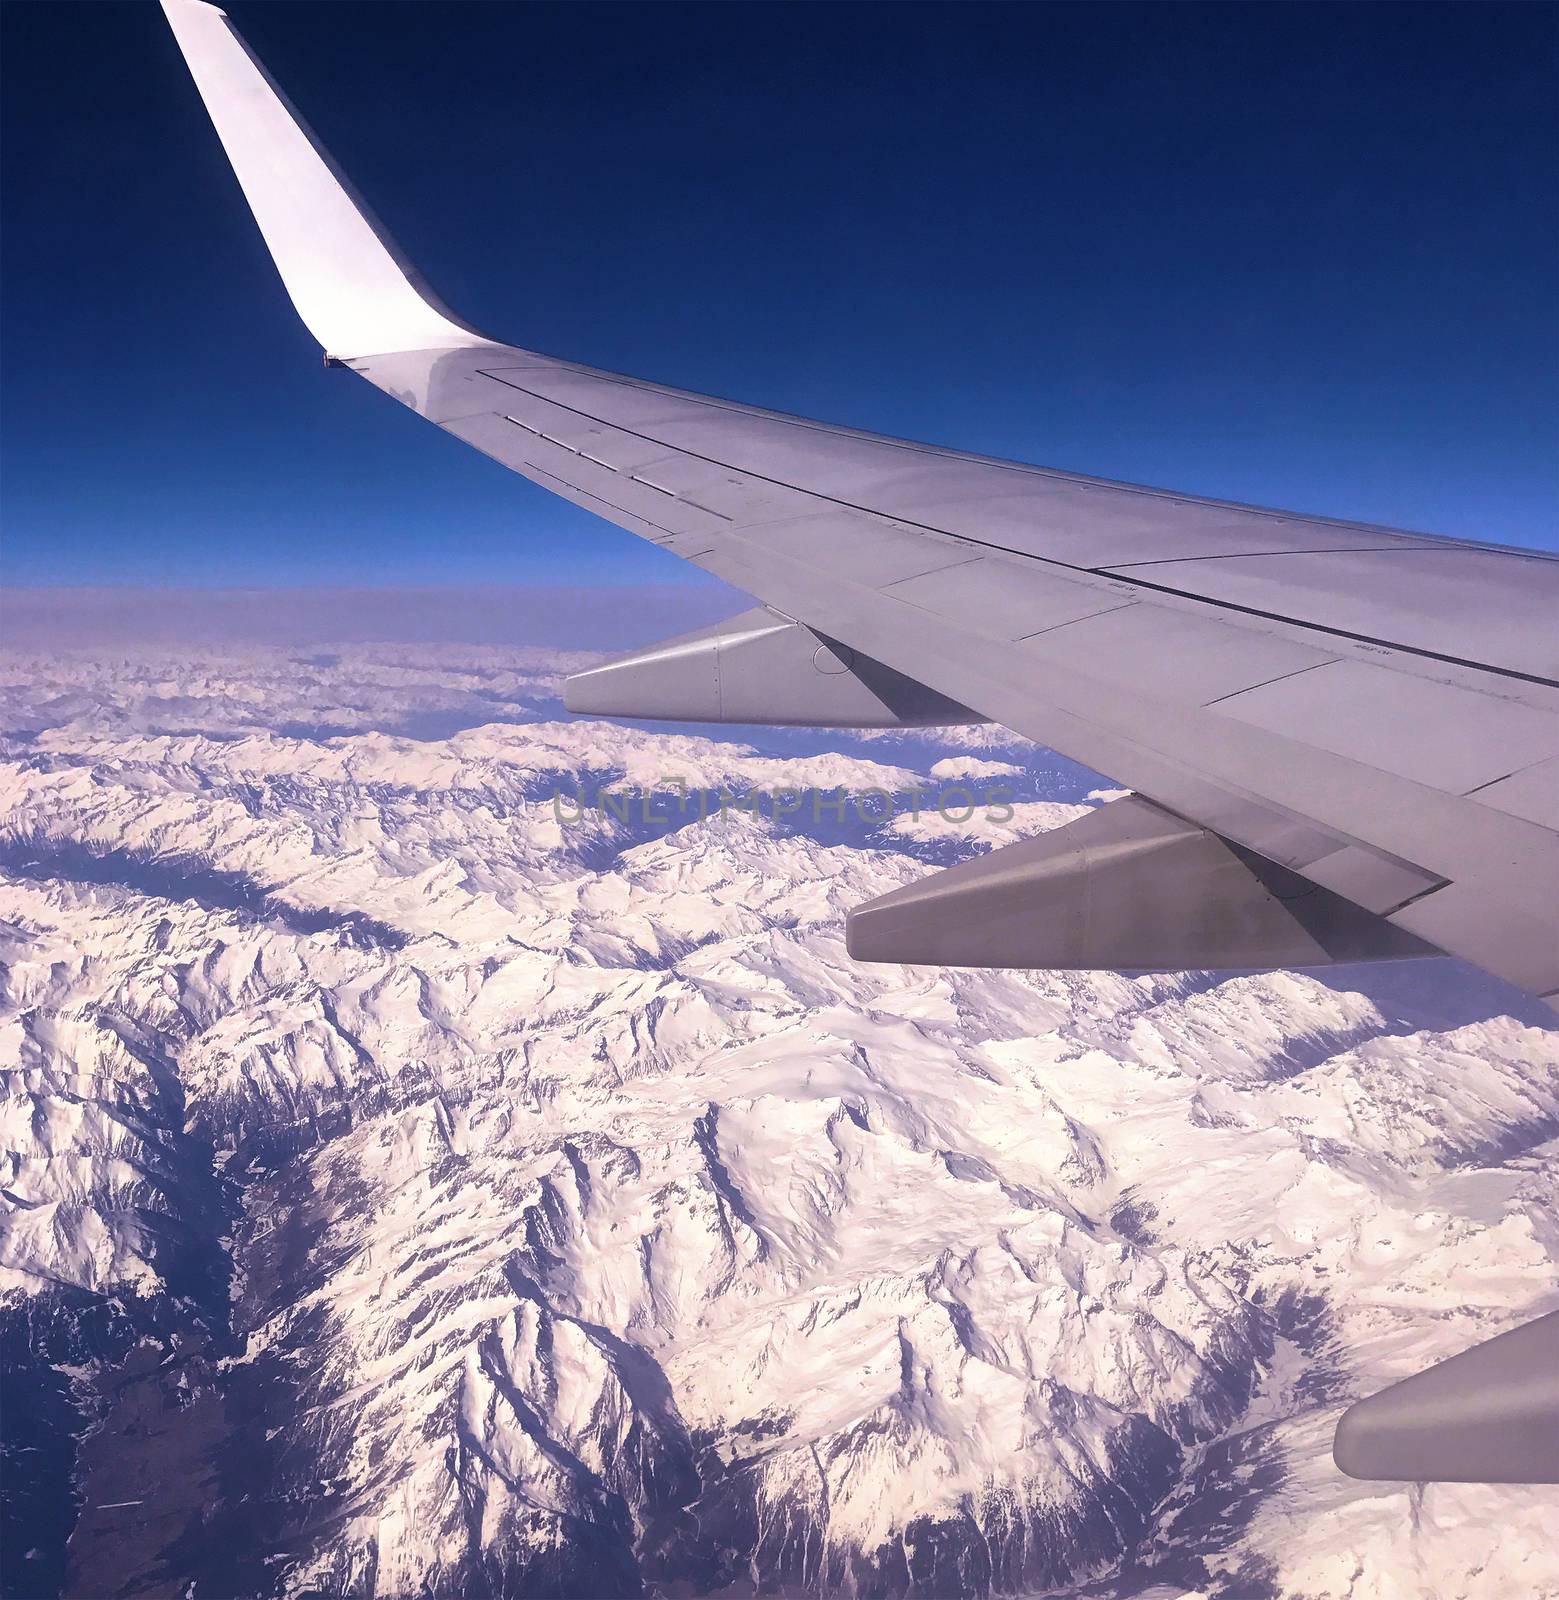 Flying over the Alps by Stefano_86